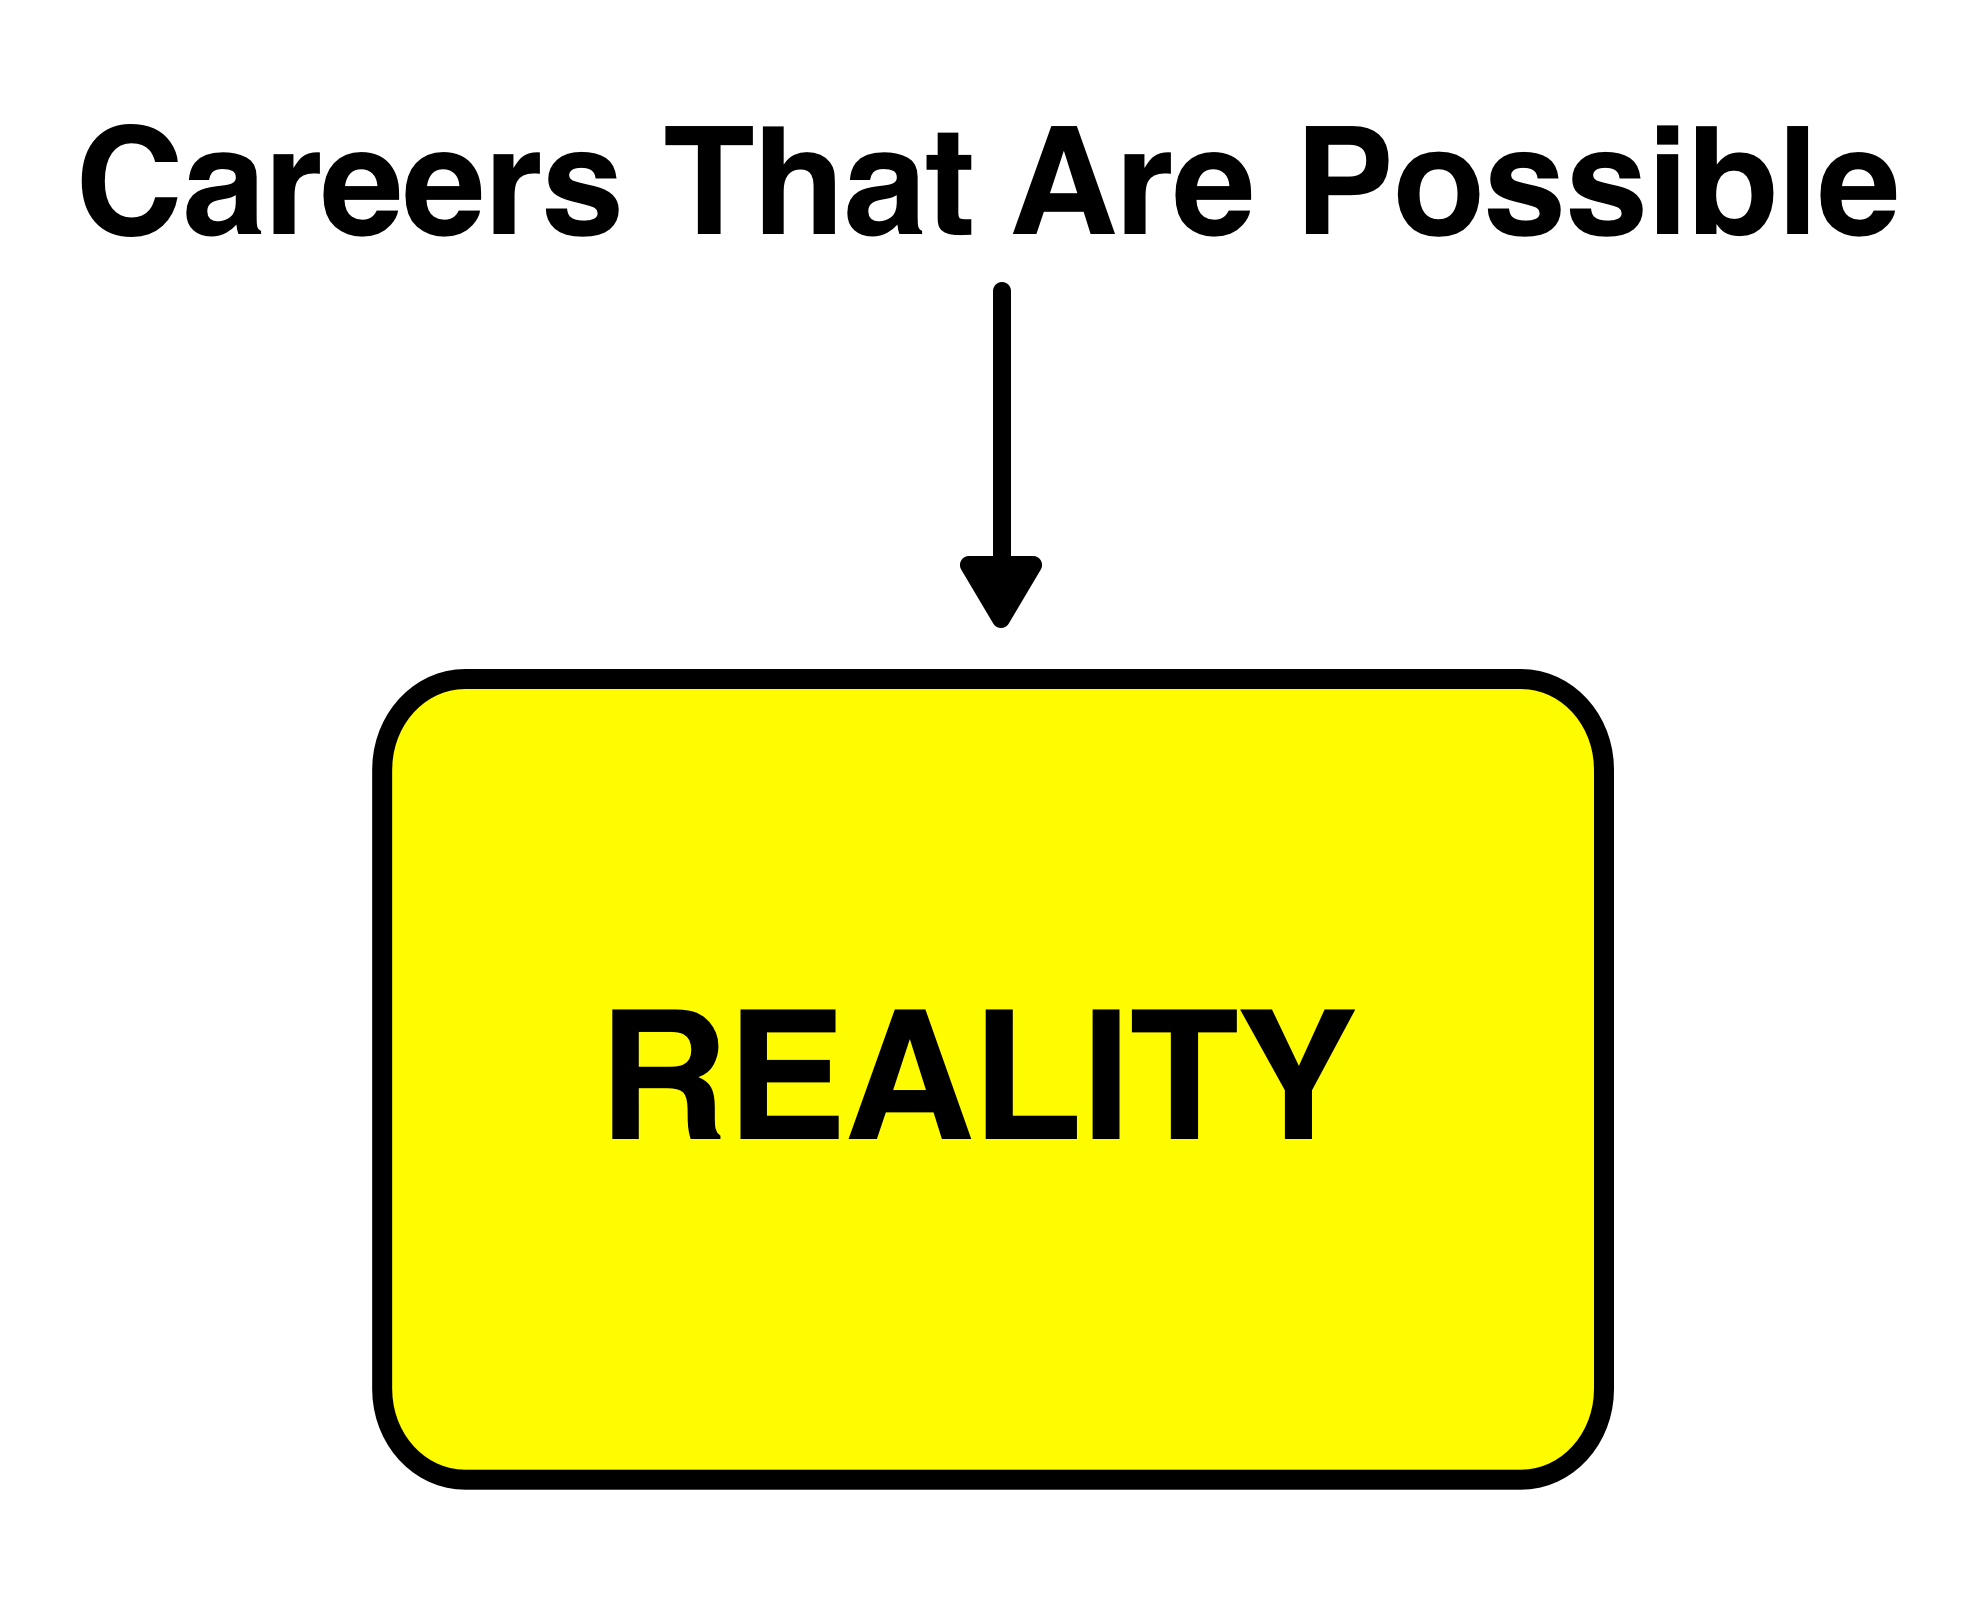 Career path meaning